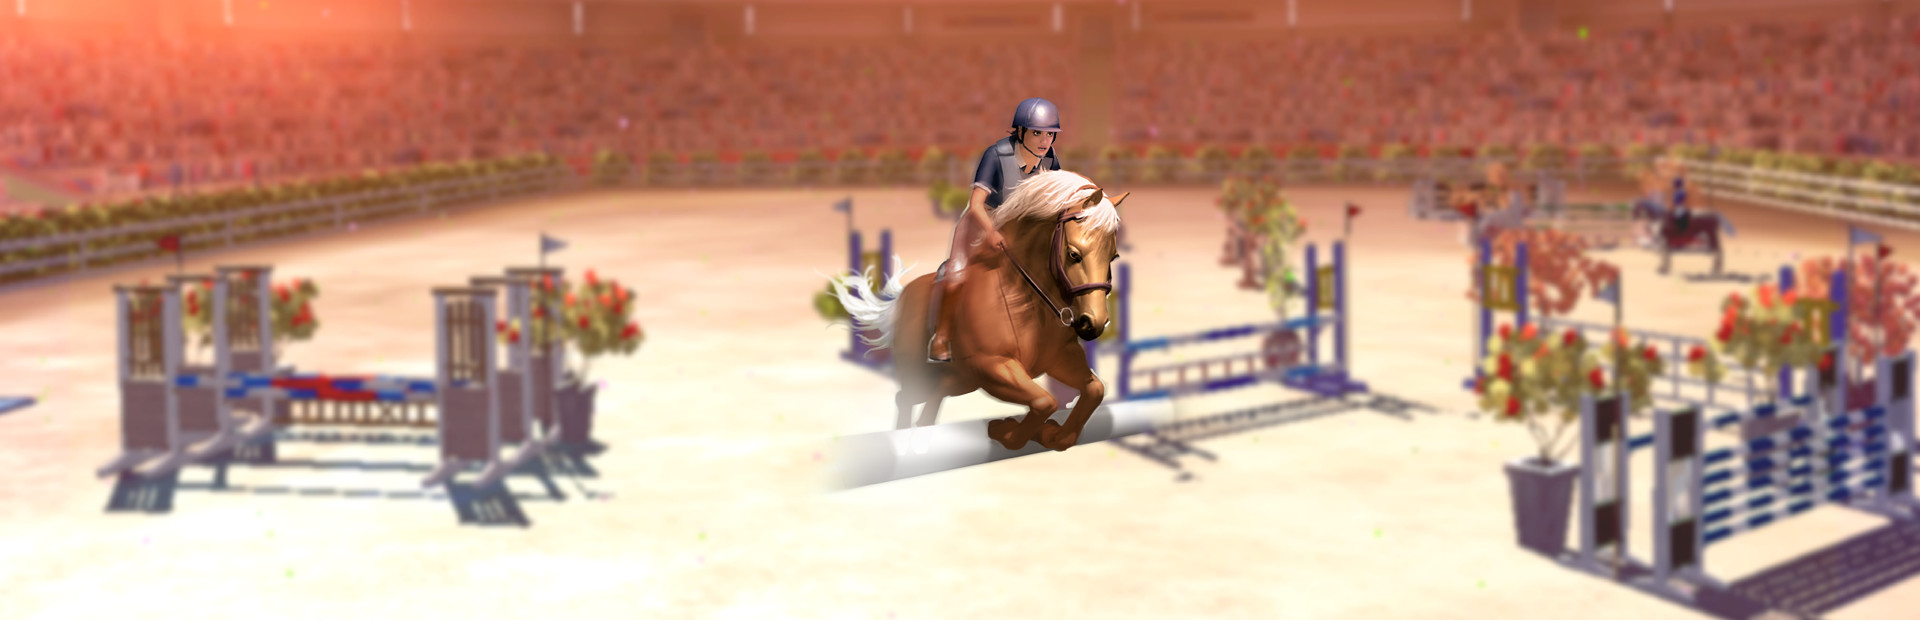 Riding Club Championships cover image